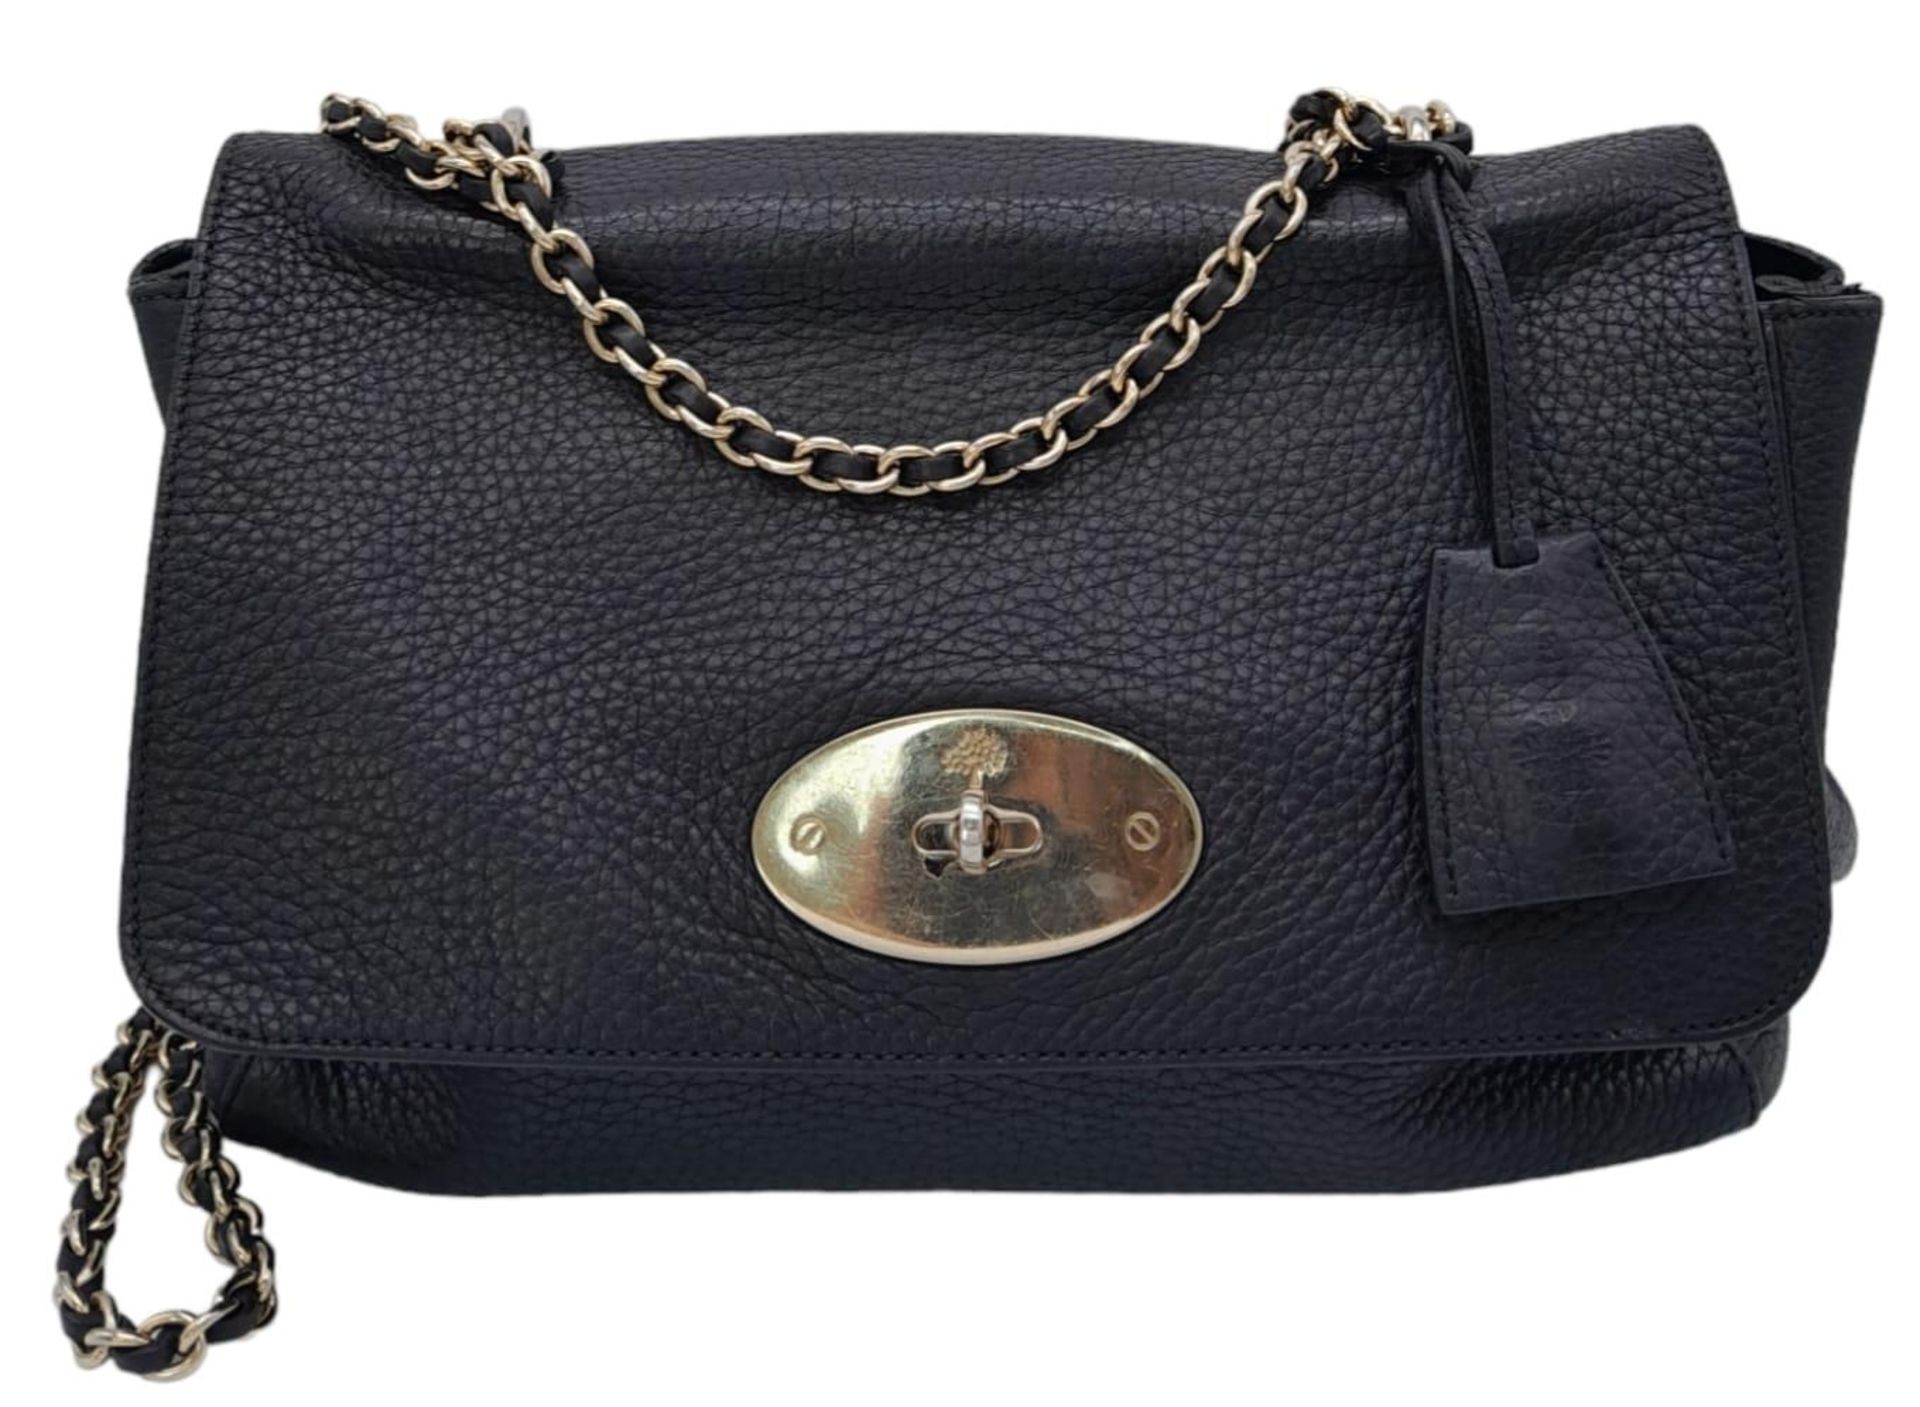 A Black Mulberry Lily Bag. With a Classic Grain Leather, Flap Over Design, Signature Postman Style